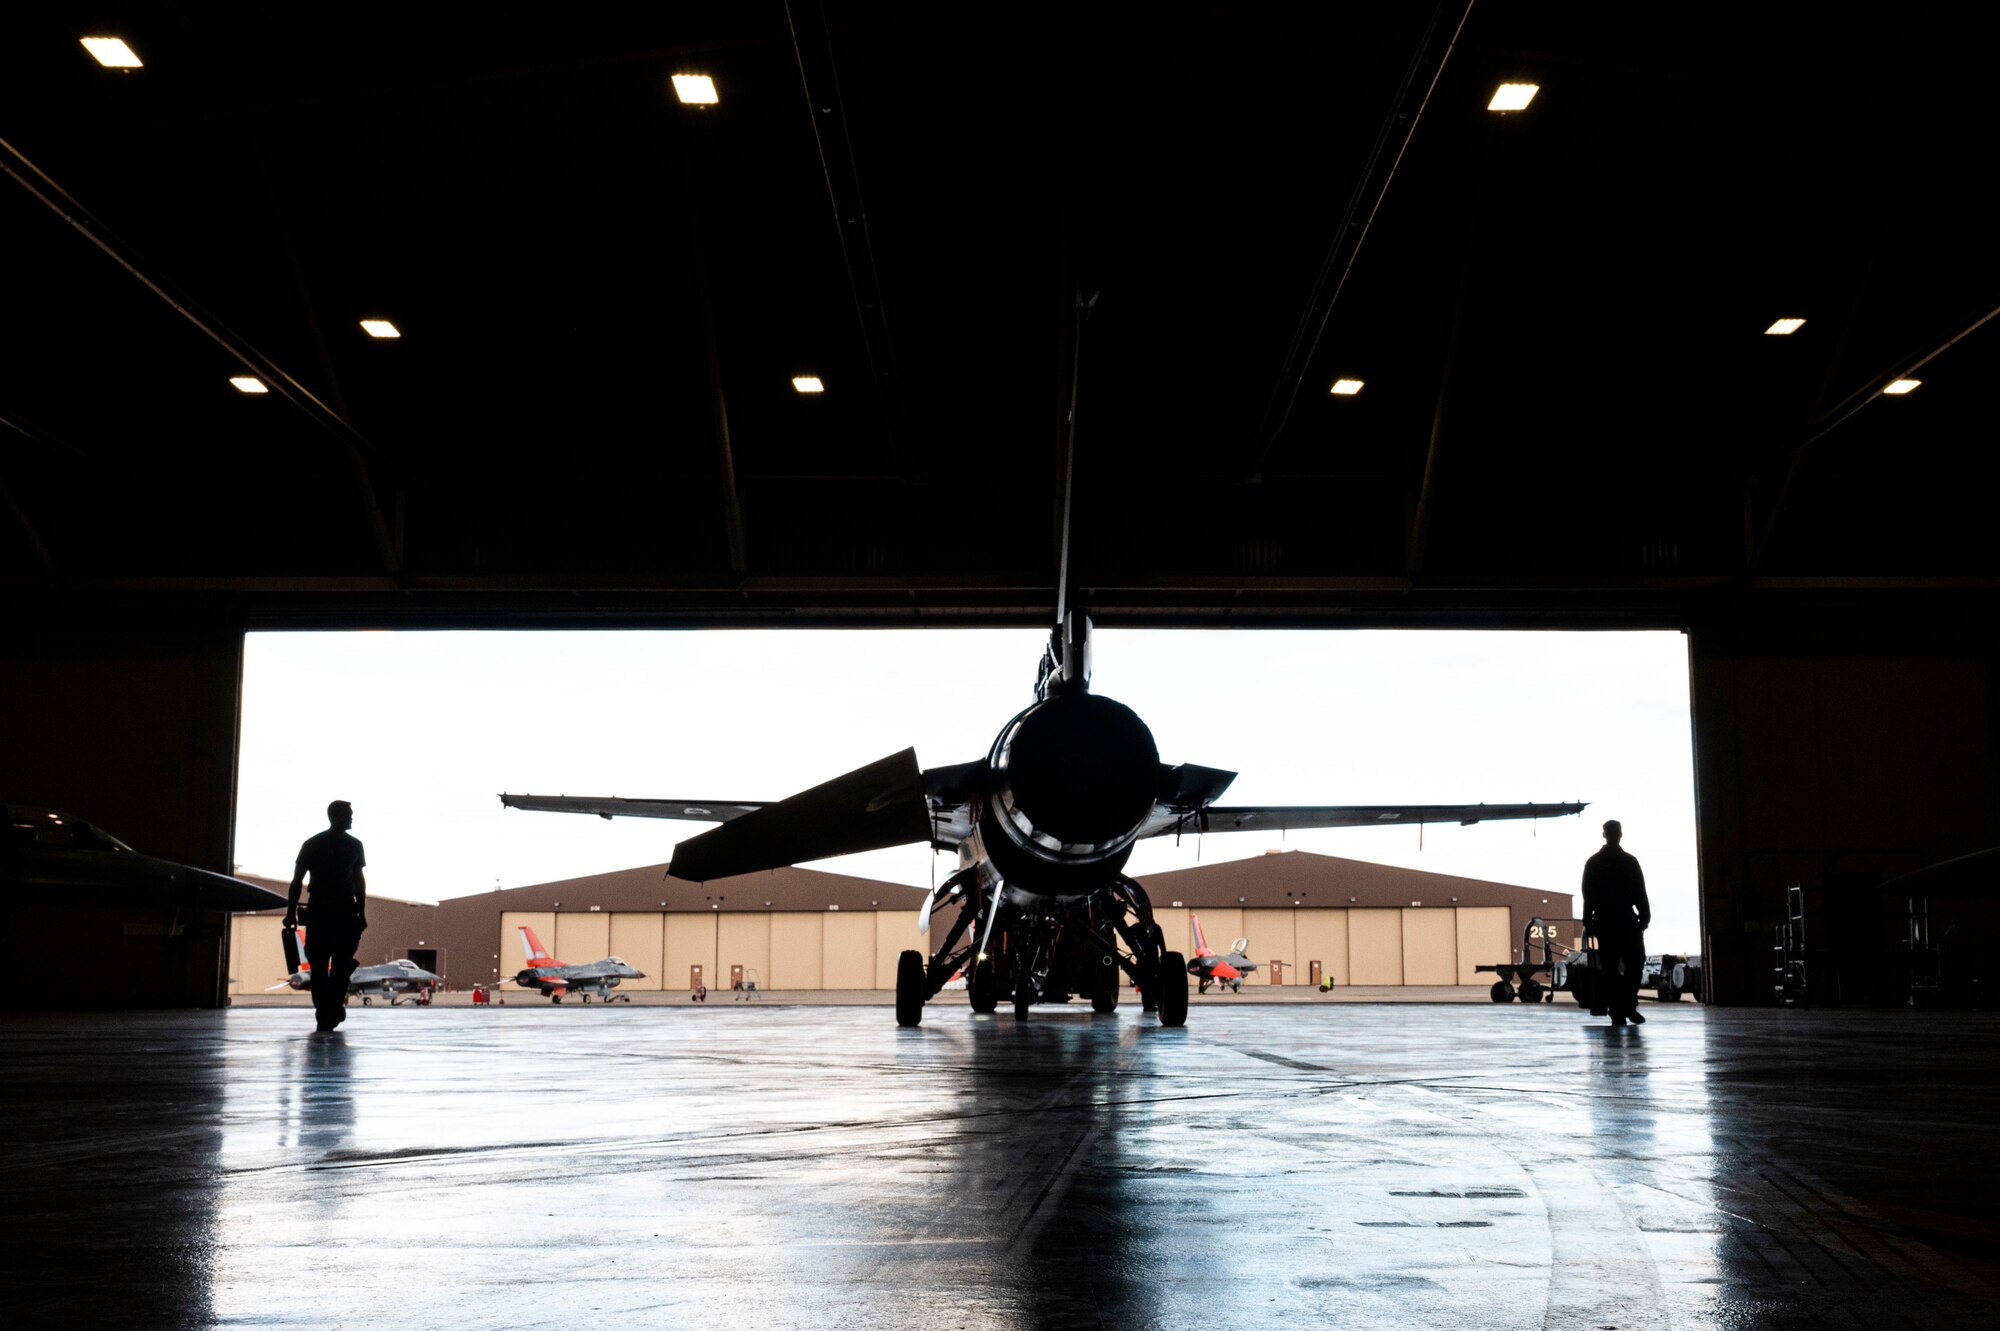 Airmen from the 49th Equipment Maintenance Squadron phase section tow an F-16 Viper for inspection at Holloman Air Force Base, New Mexico, Dec. 1, 2023. The 49th EMS phase section is responsible for providing thorough inspections of all F-16s  before and after flight operations. (U.S. Air Force photo by Airman 1st Class Isaiah Pedrazzini)